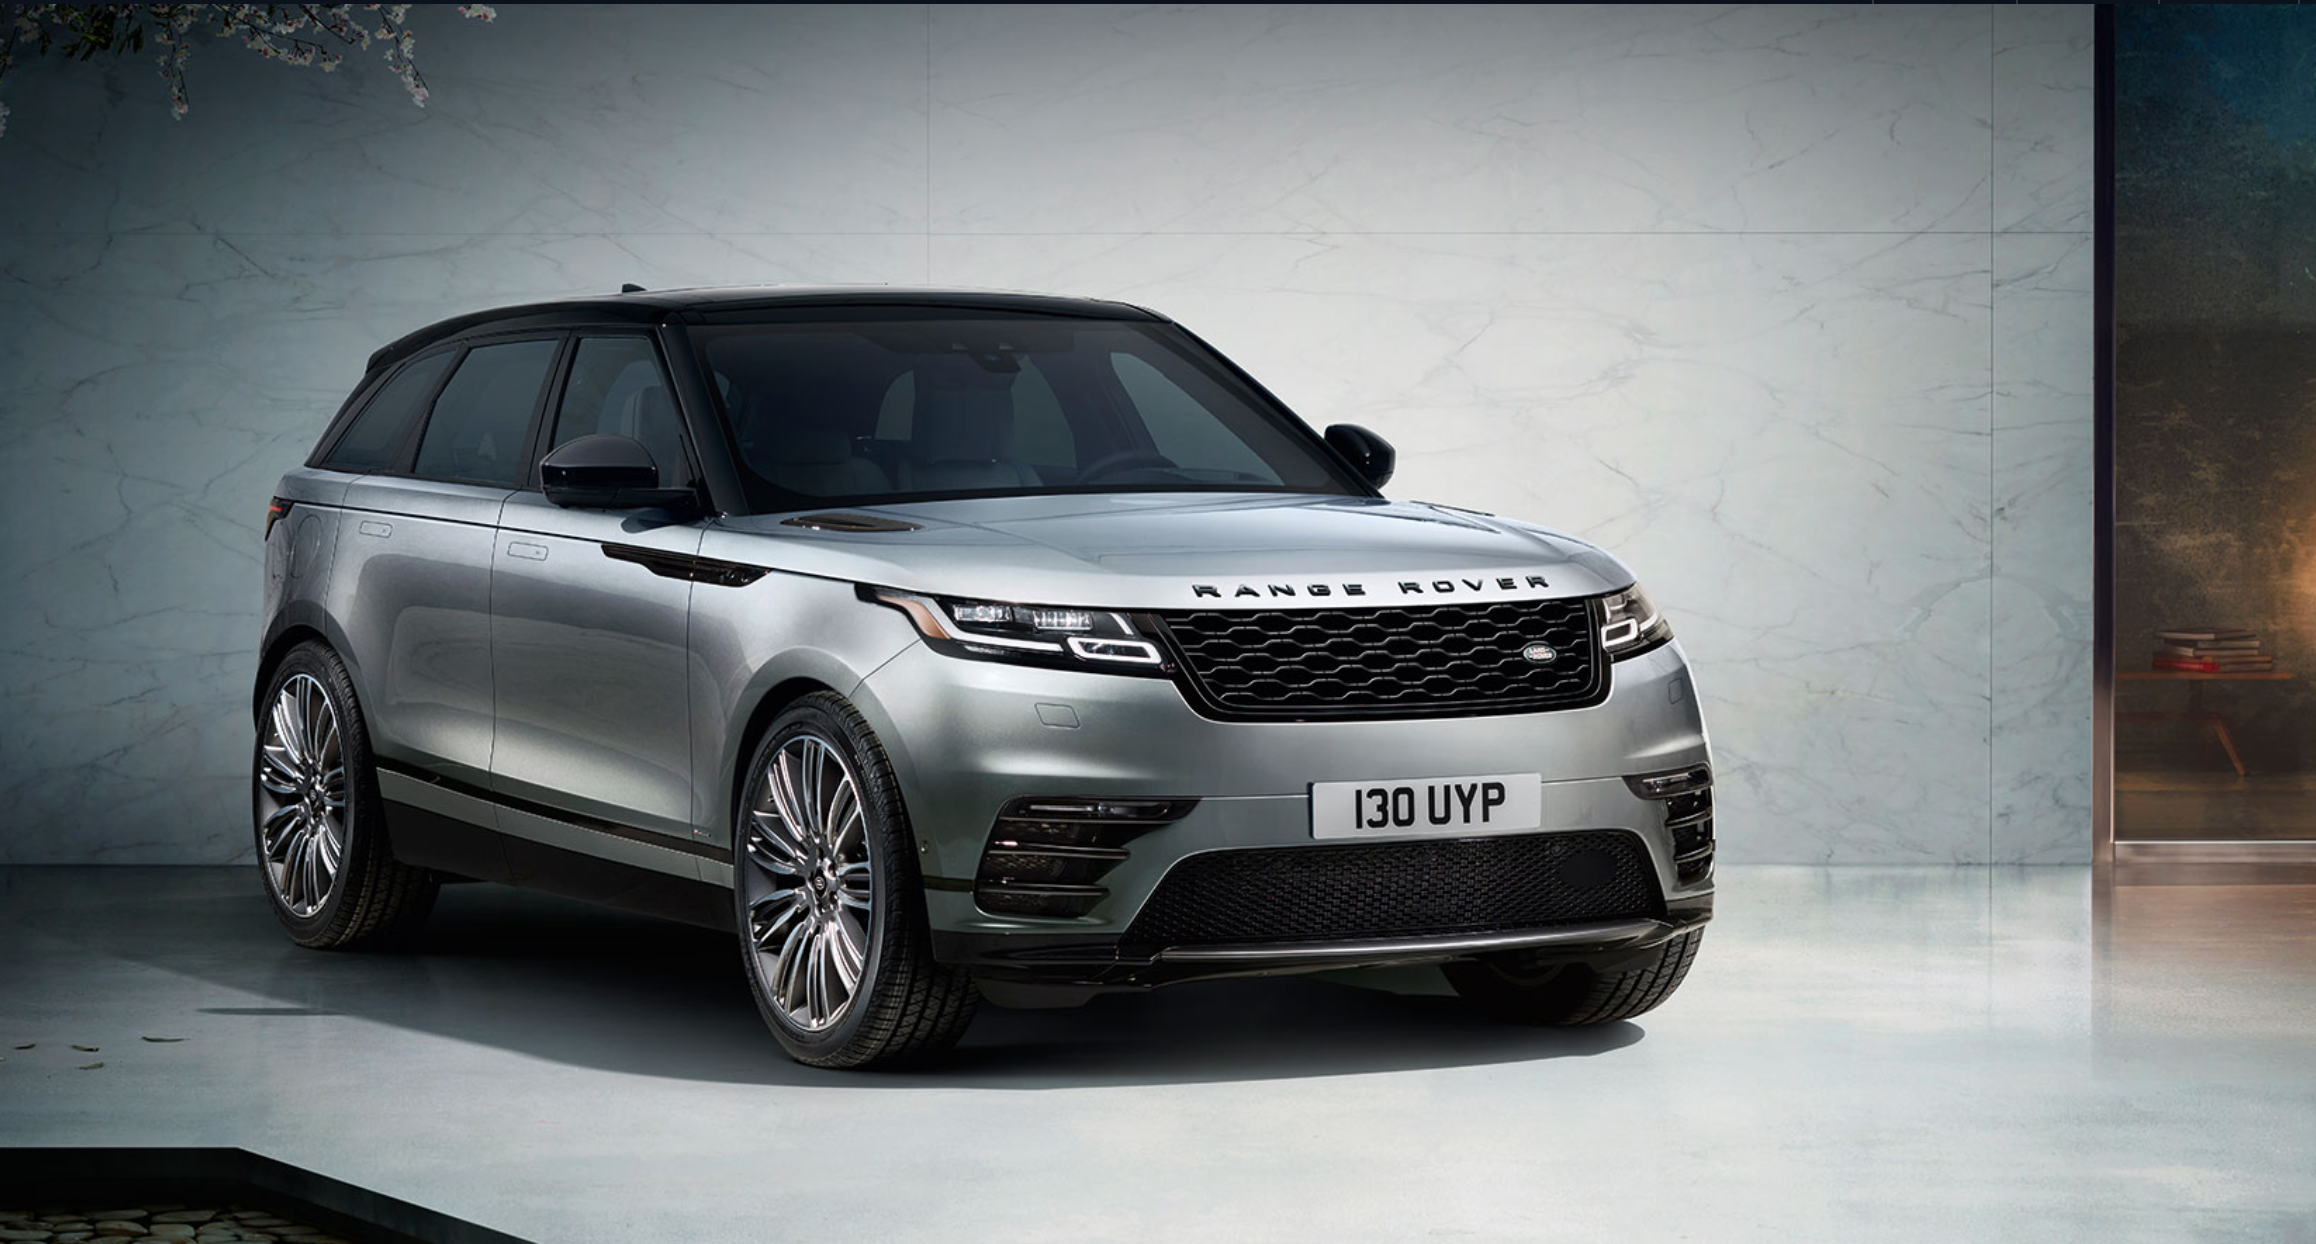 A Supercharged SUV: The 2019 Range Rover Velar